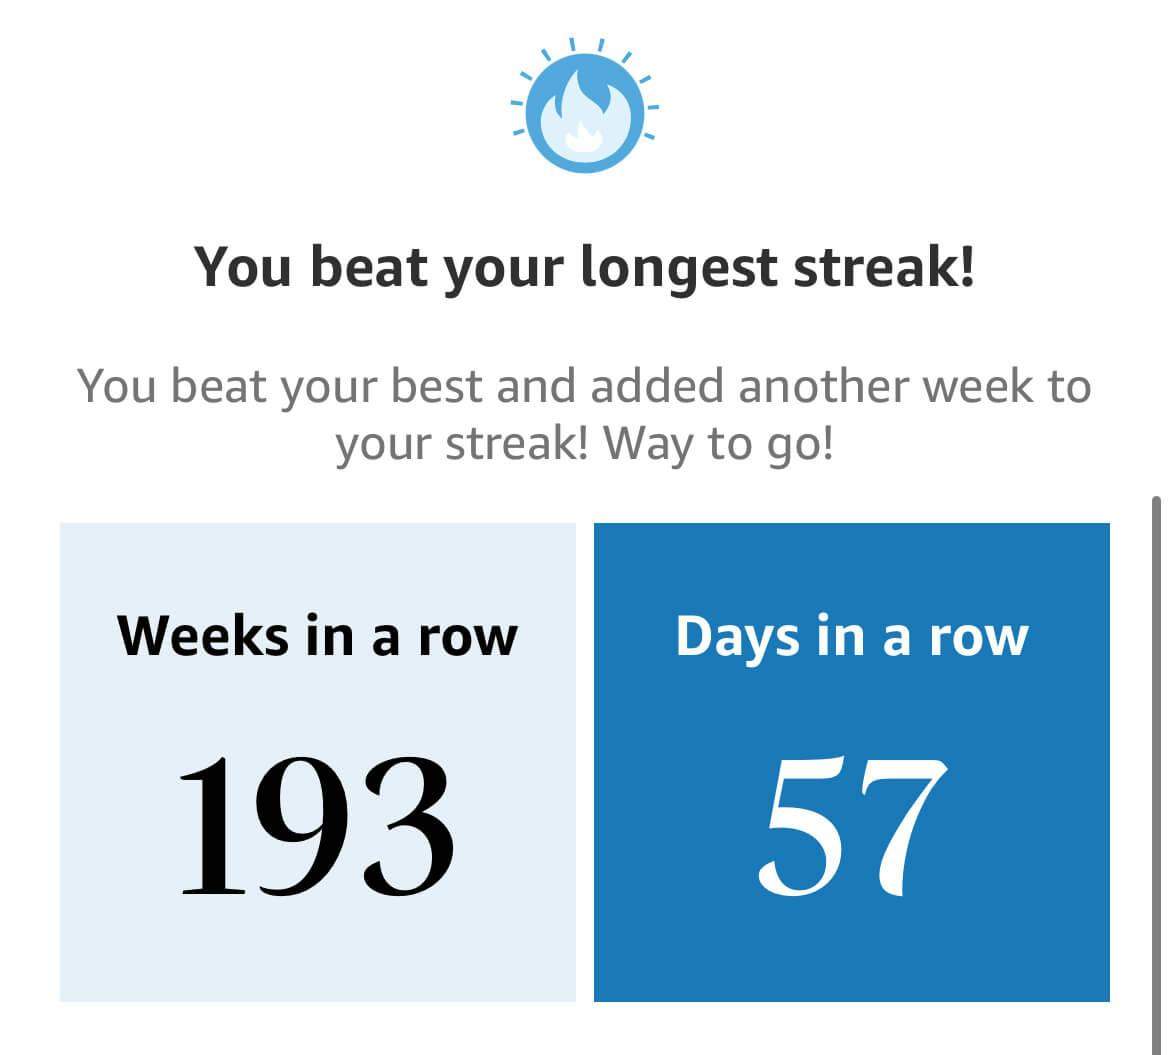 Screenshot of current streak - 193 weeks continuous reading, 57 days continuous reading